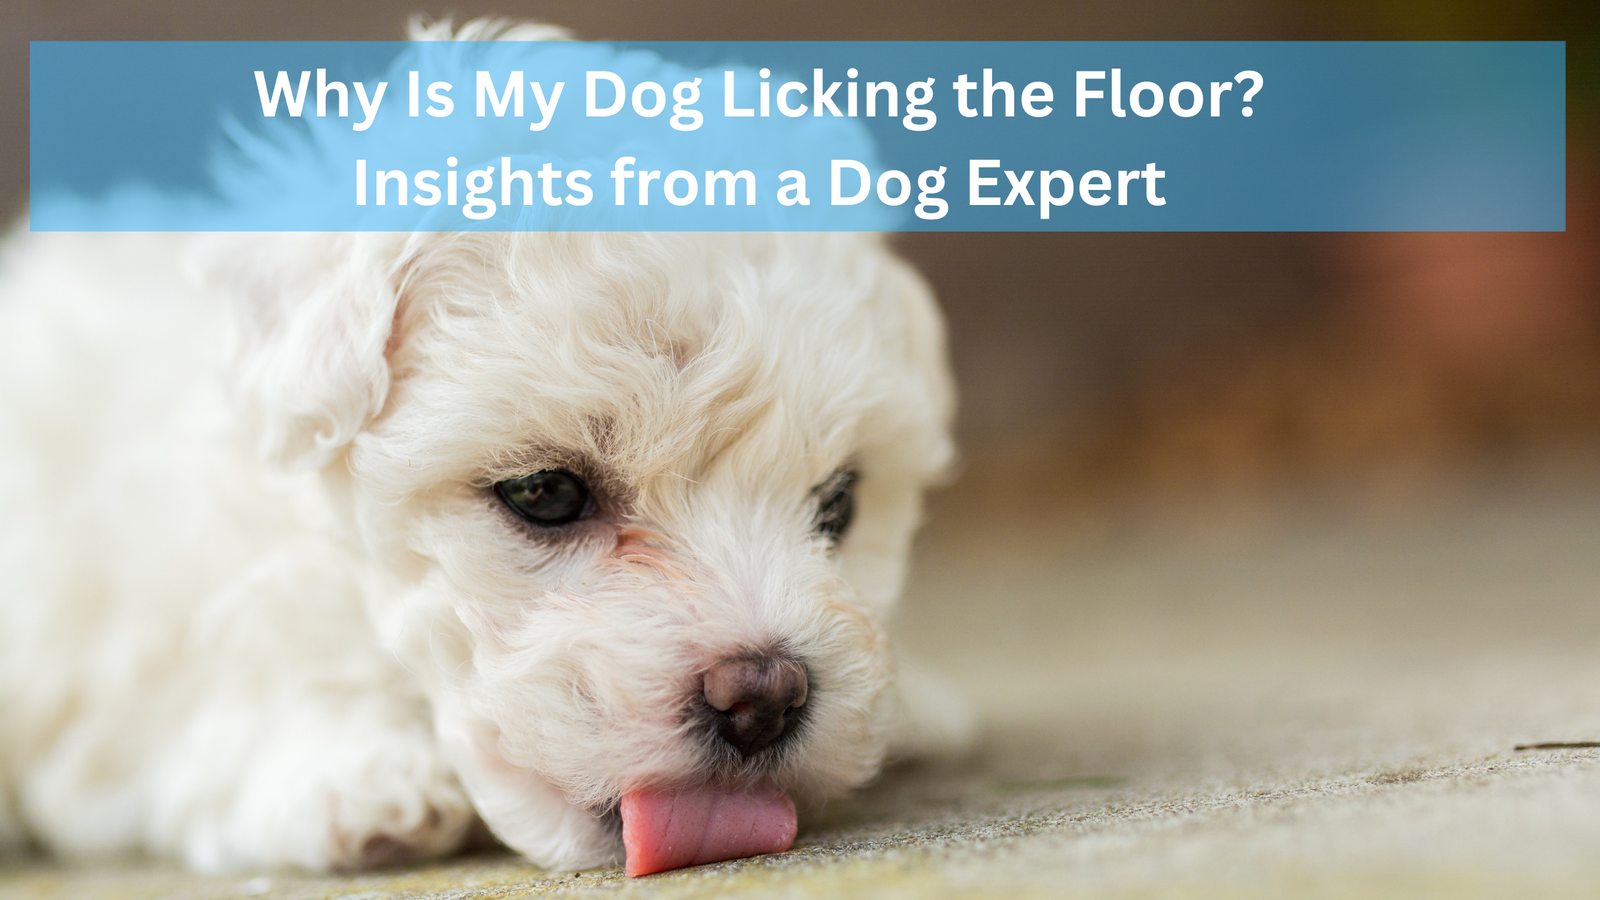 Why Is My Dog Licking the Floor? Insights from a Dog Expert